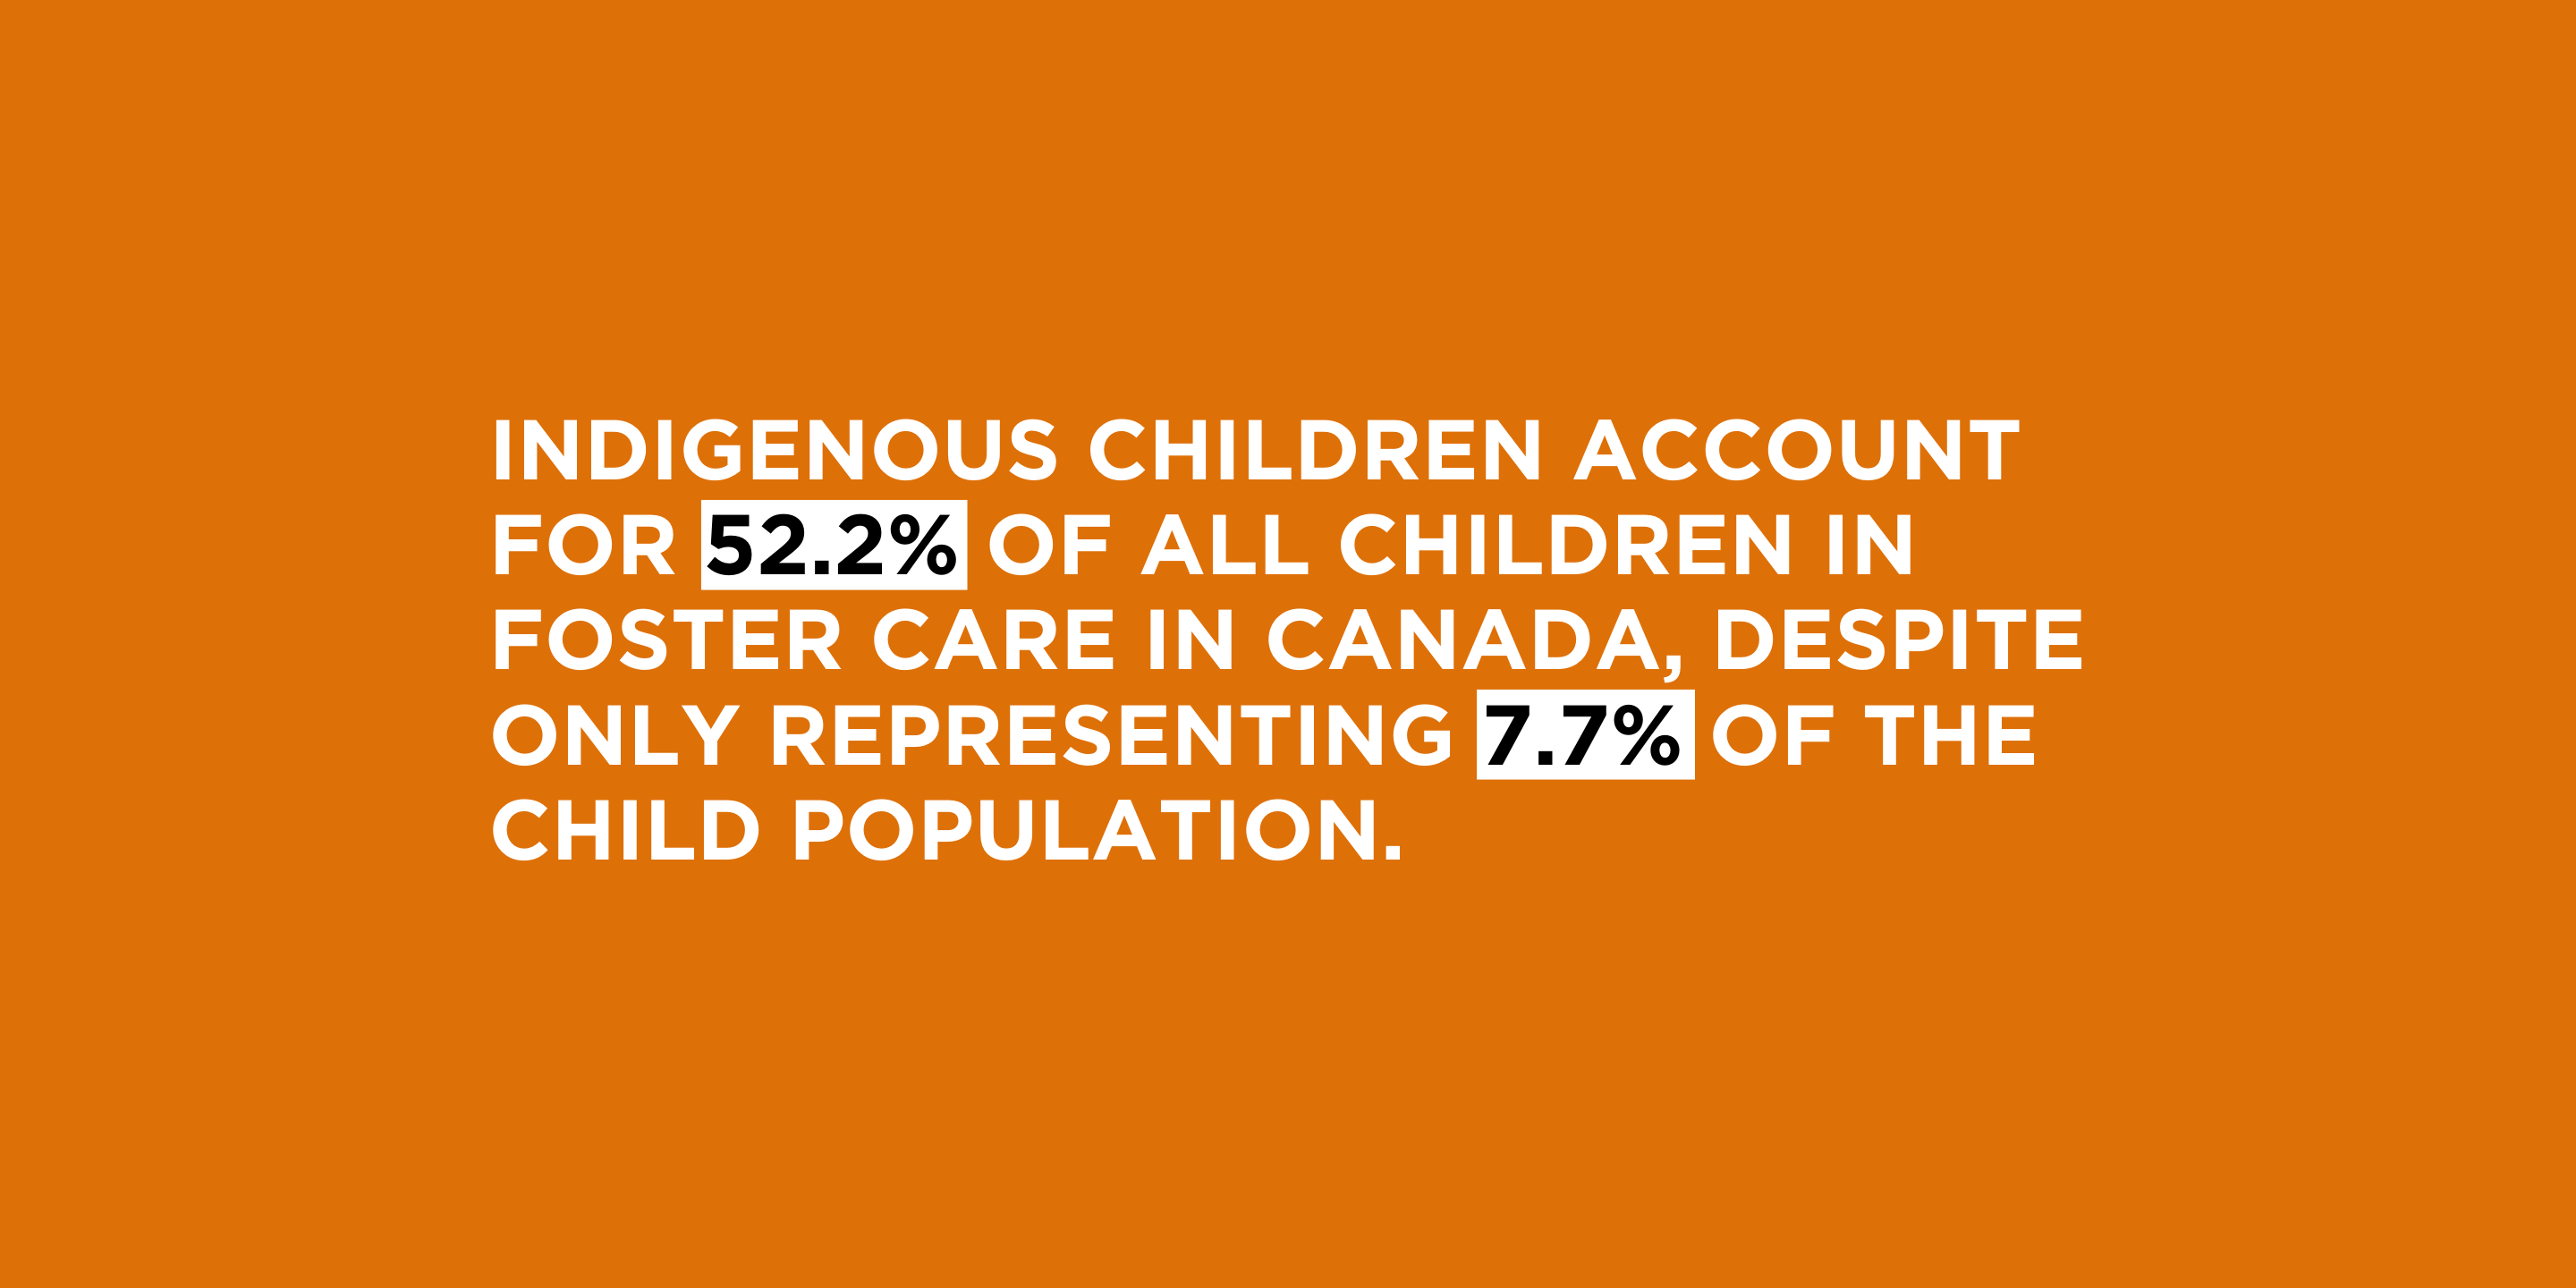 Text: Indigenous children account for 52.2% of all children in foster care in Canada, despite only representing 7.7% of the child population. 